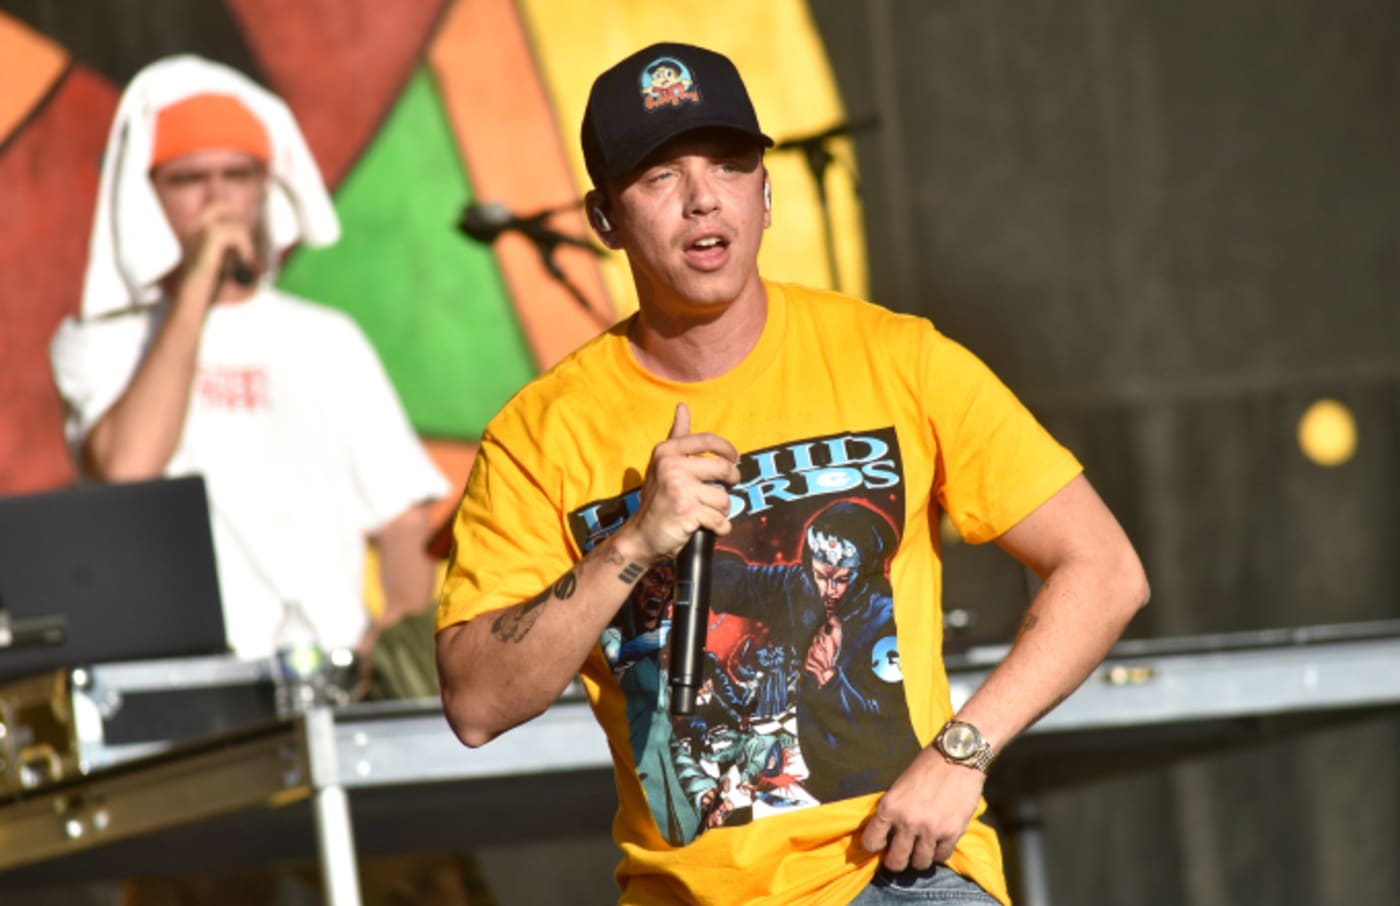 Logic performs during the 2019 New Orleans Jazz & Heritage Festival 50th Anniversary